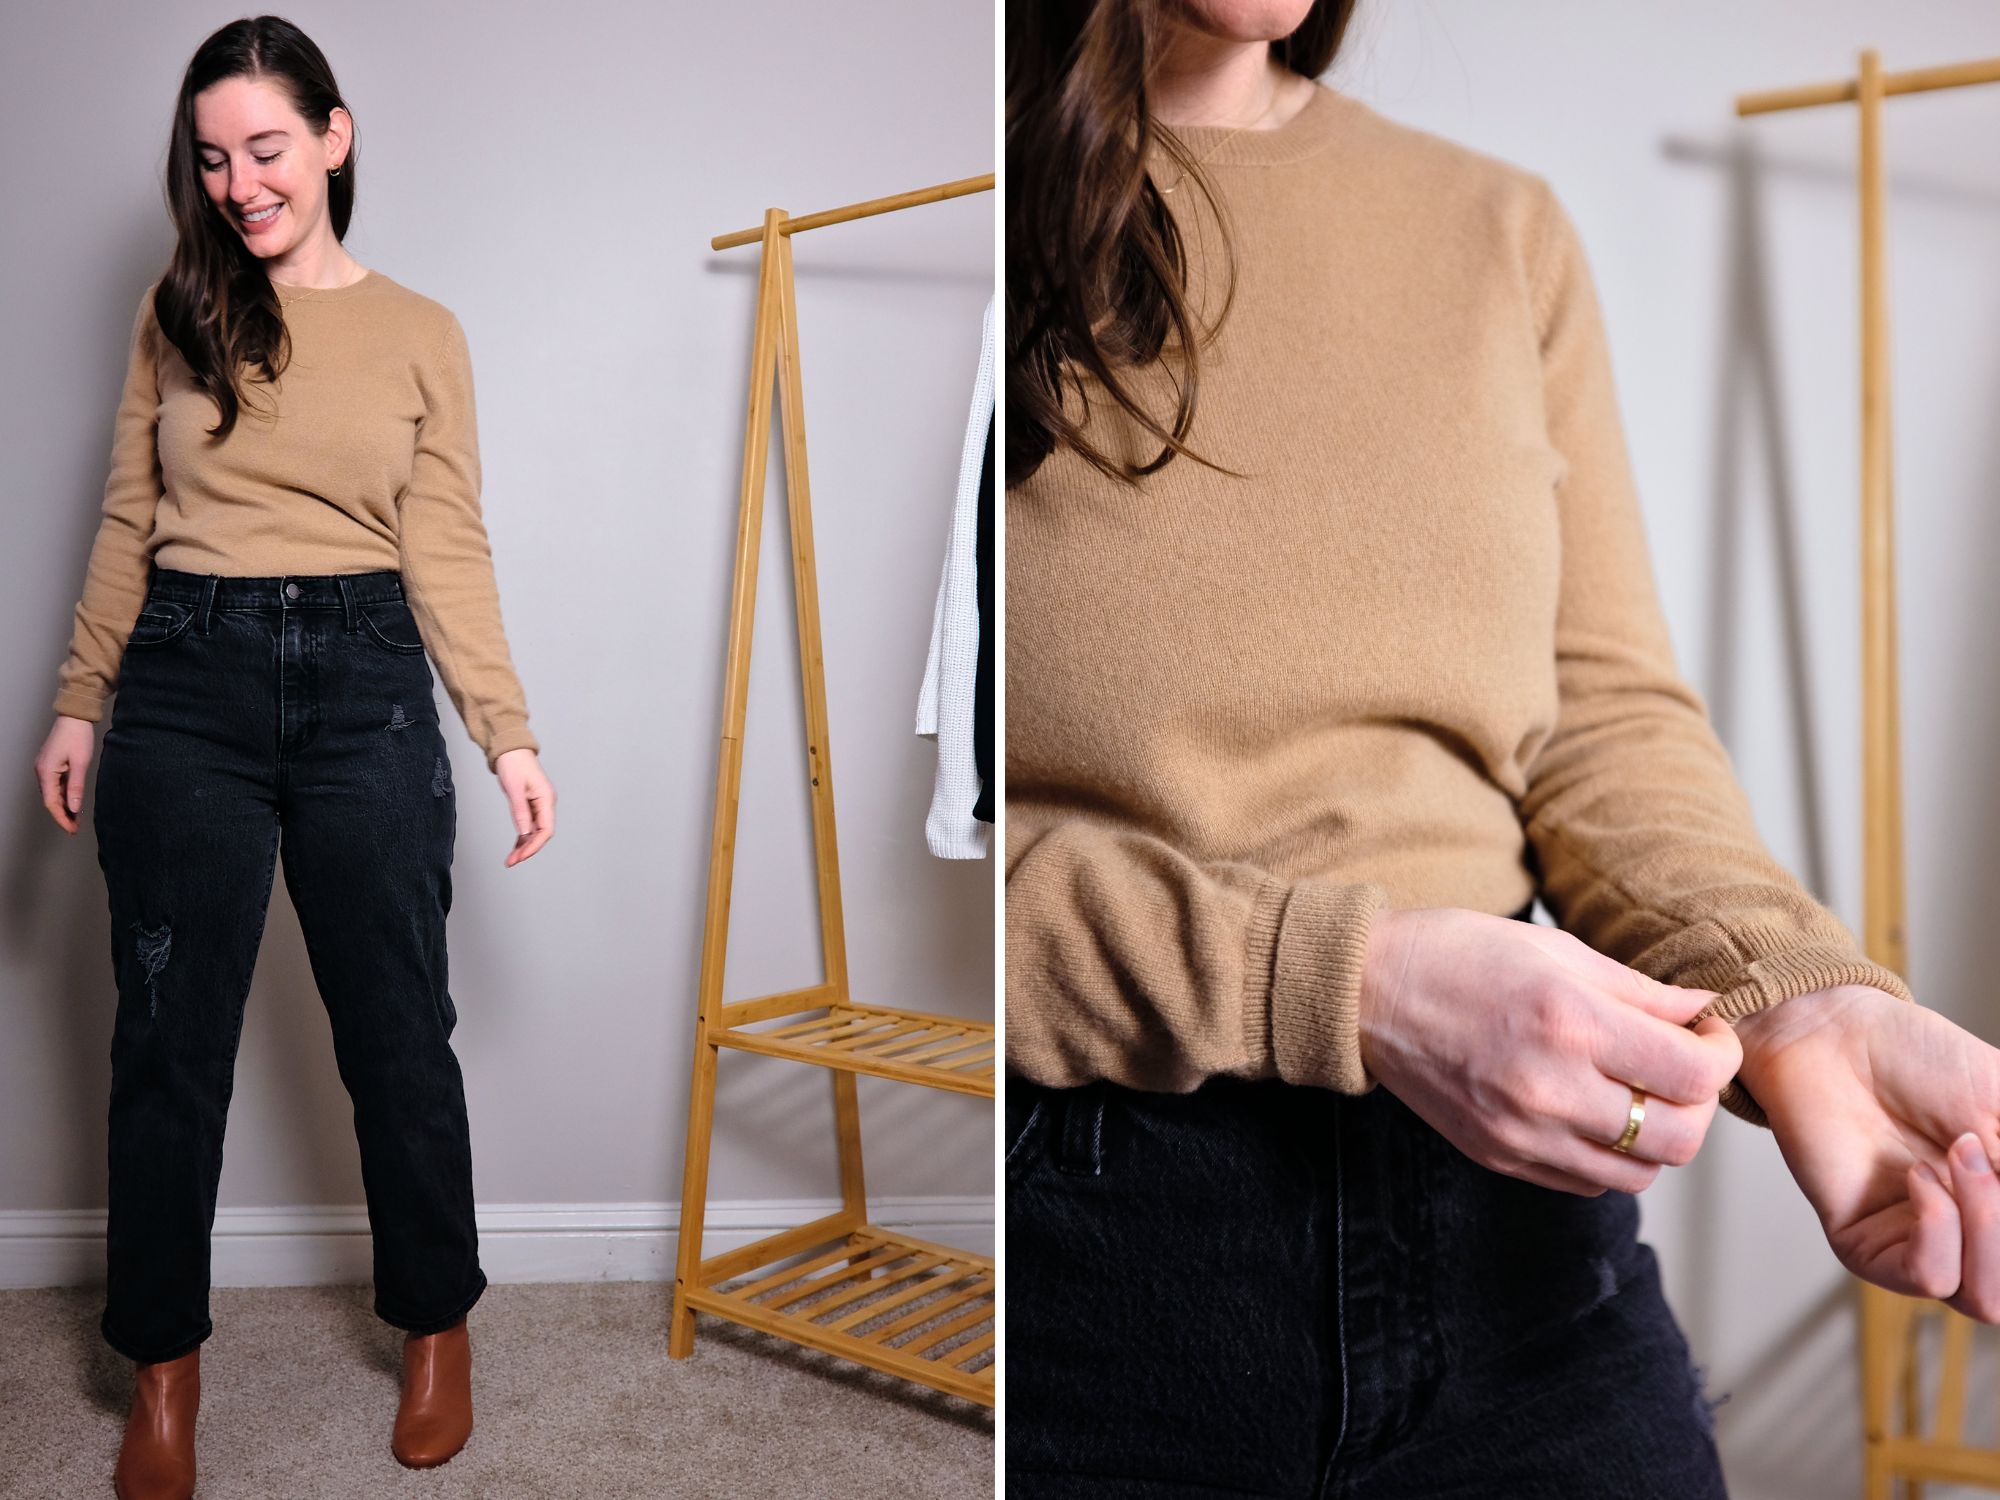 Alyssa wears the $50 cashmere sweater from Quince with jeans and boots